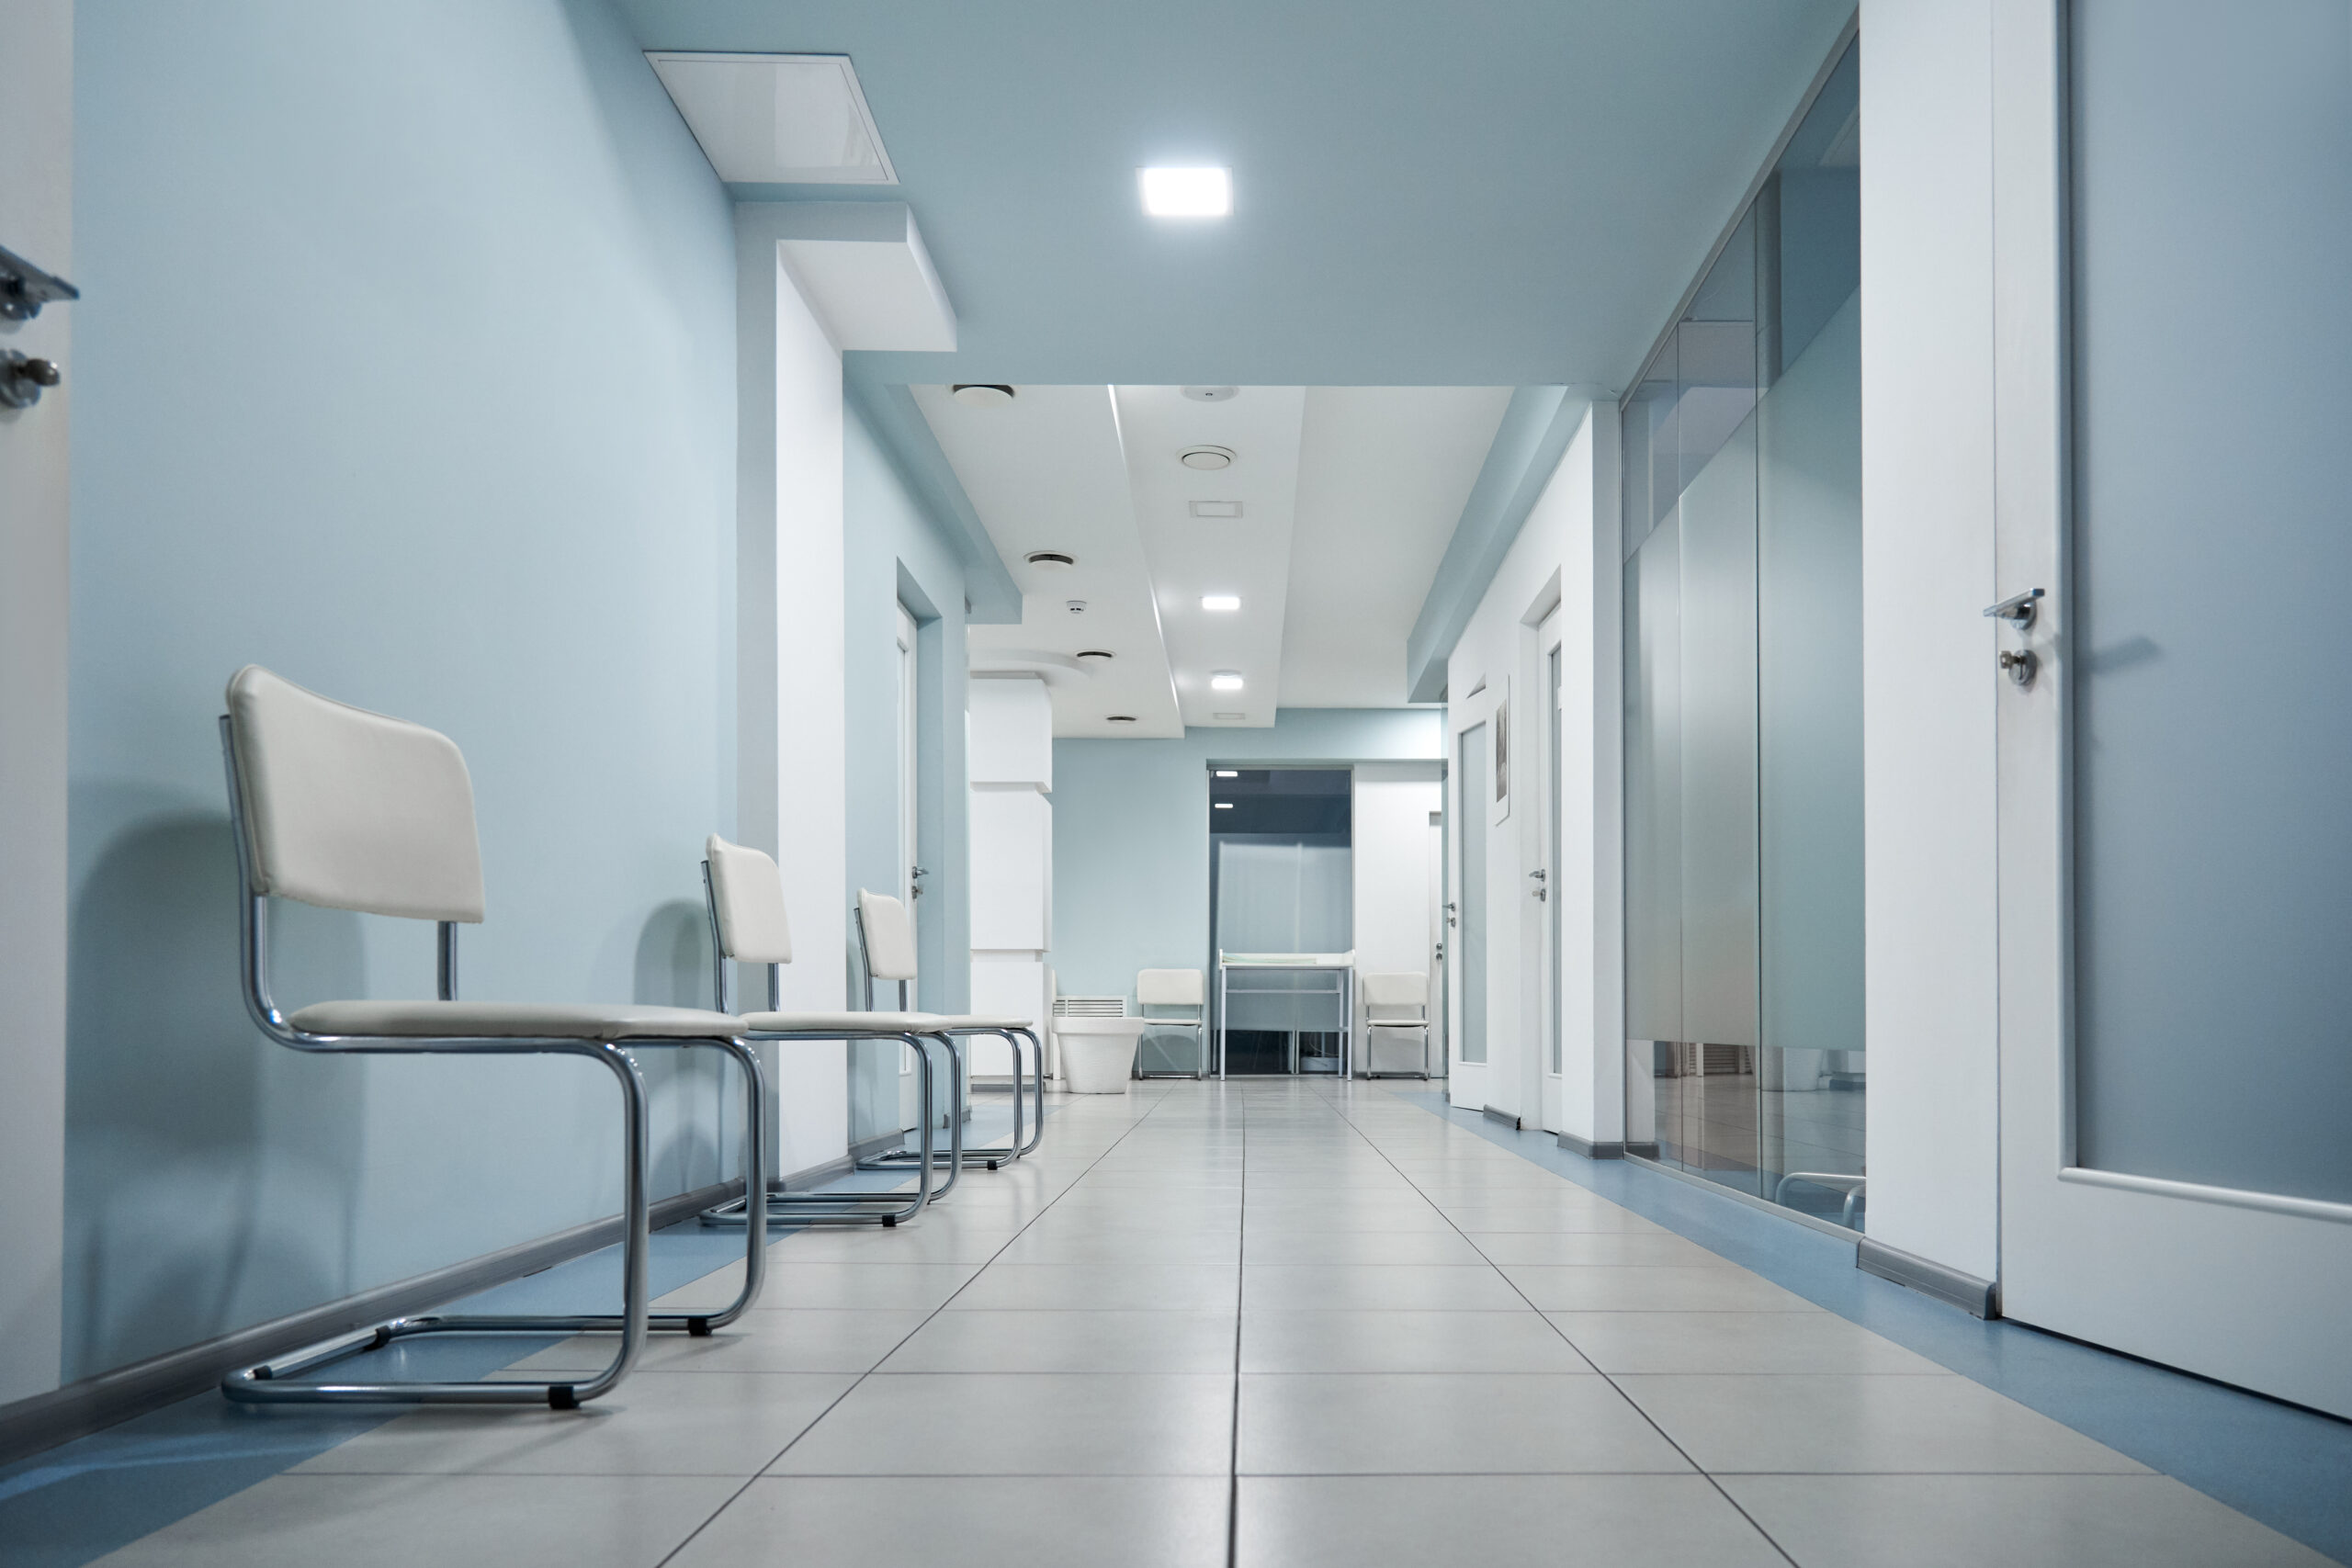 An empty hospital waiting room, with clean white walls and polished floors under bright white flourescent lights.